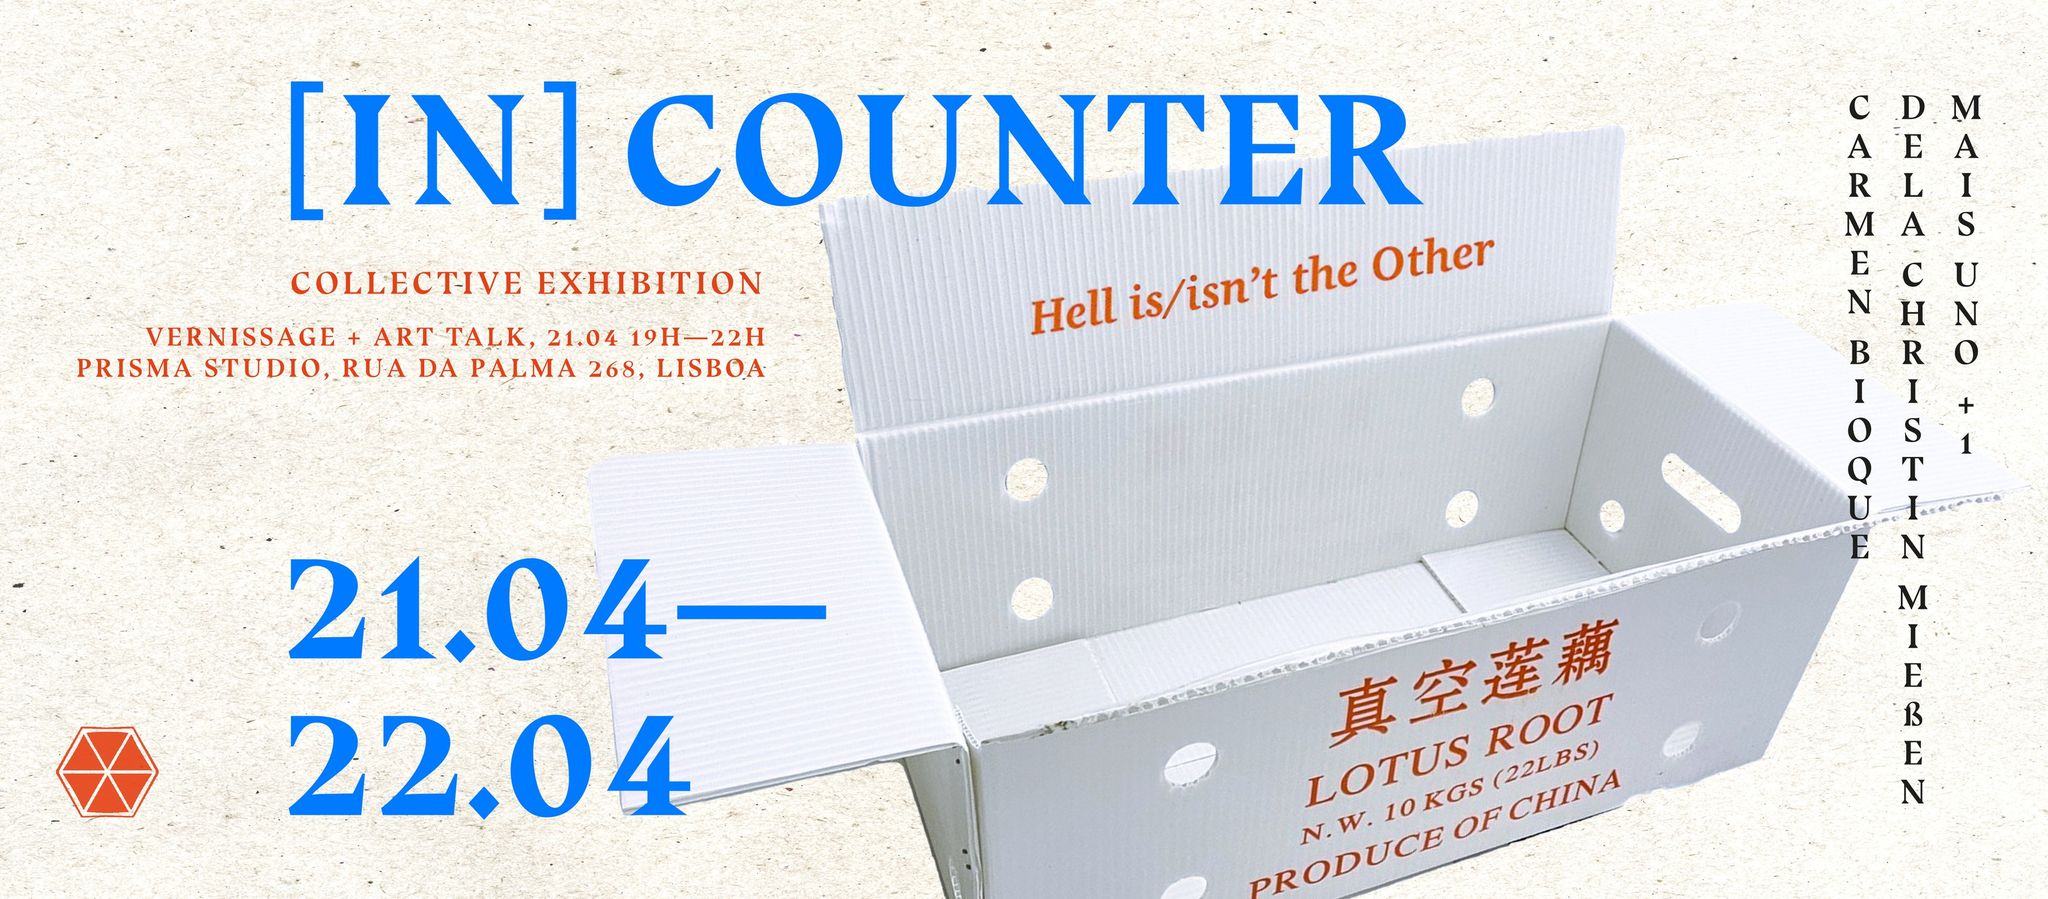 [IN] COUNTER (Exhibition)